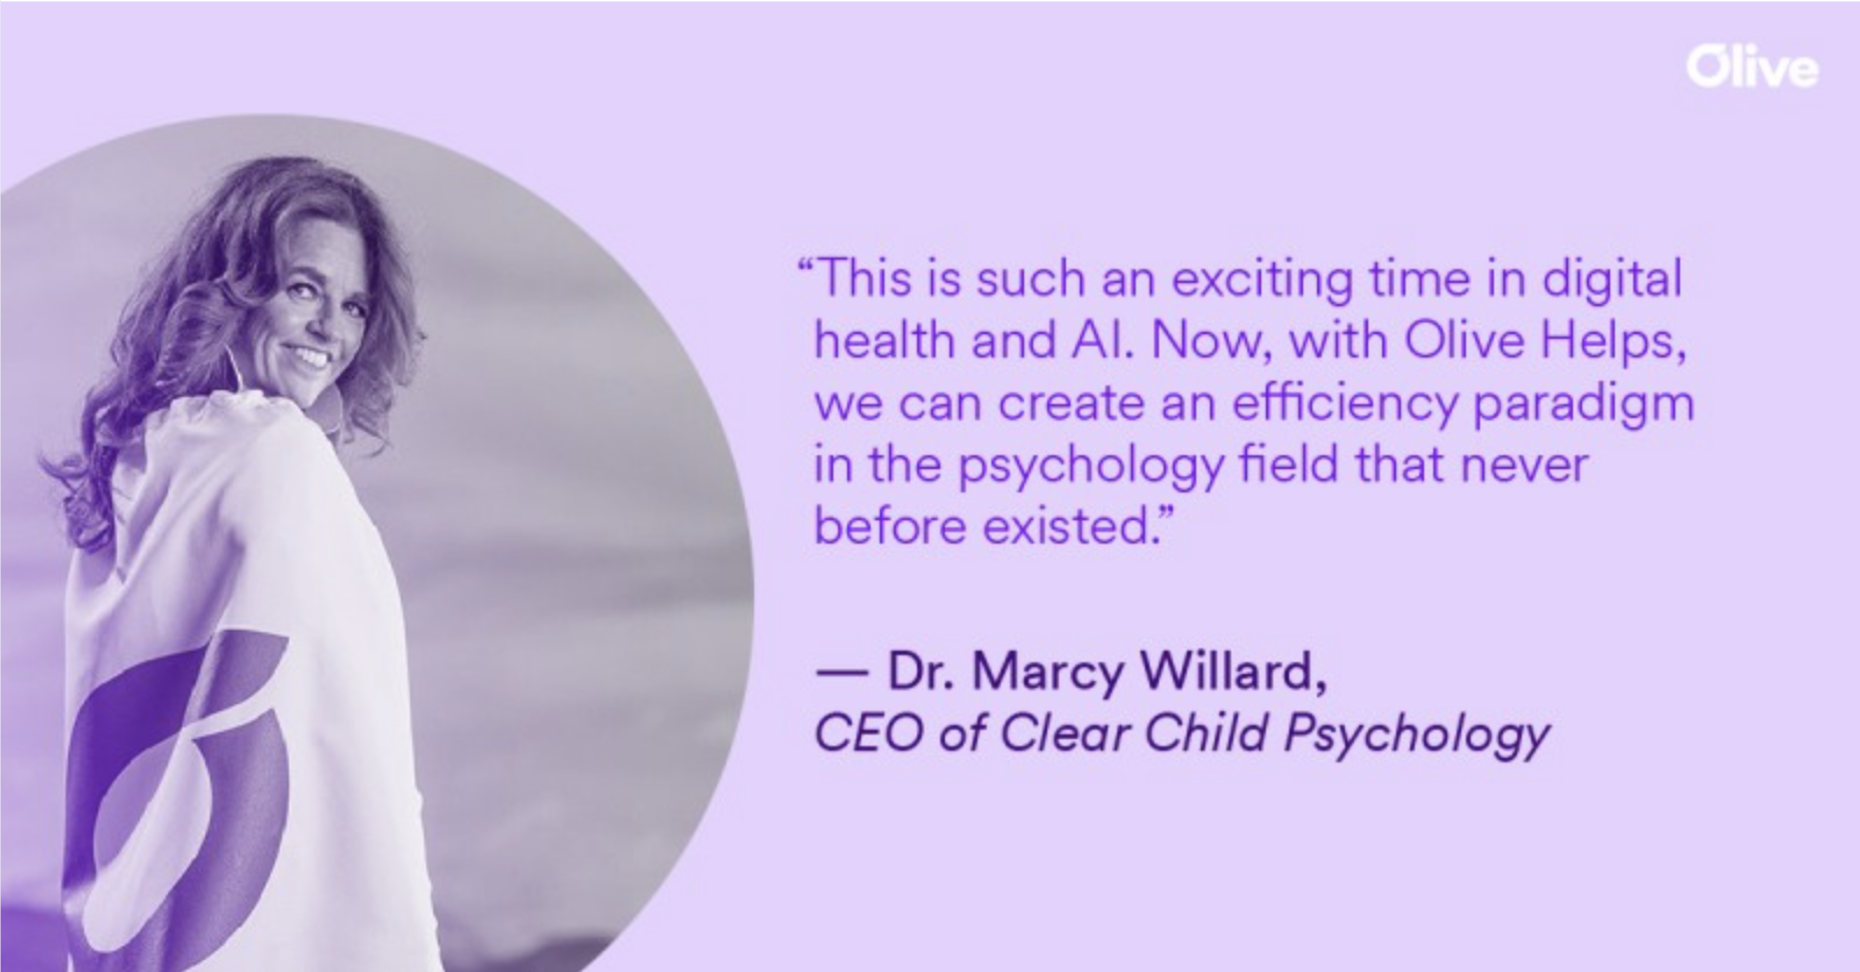 Clear Child Psychology Taps Olive Helps to Expand Access to Behavioral Health Support